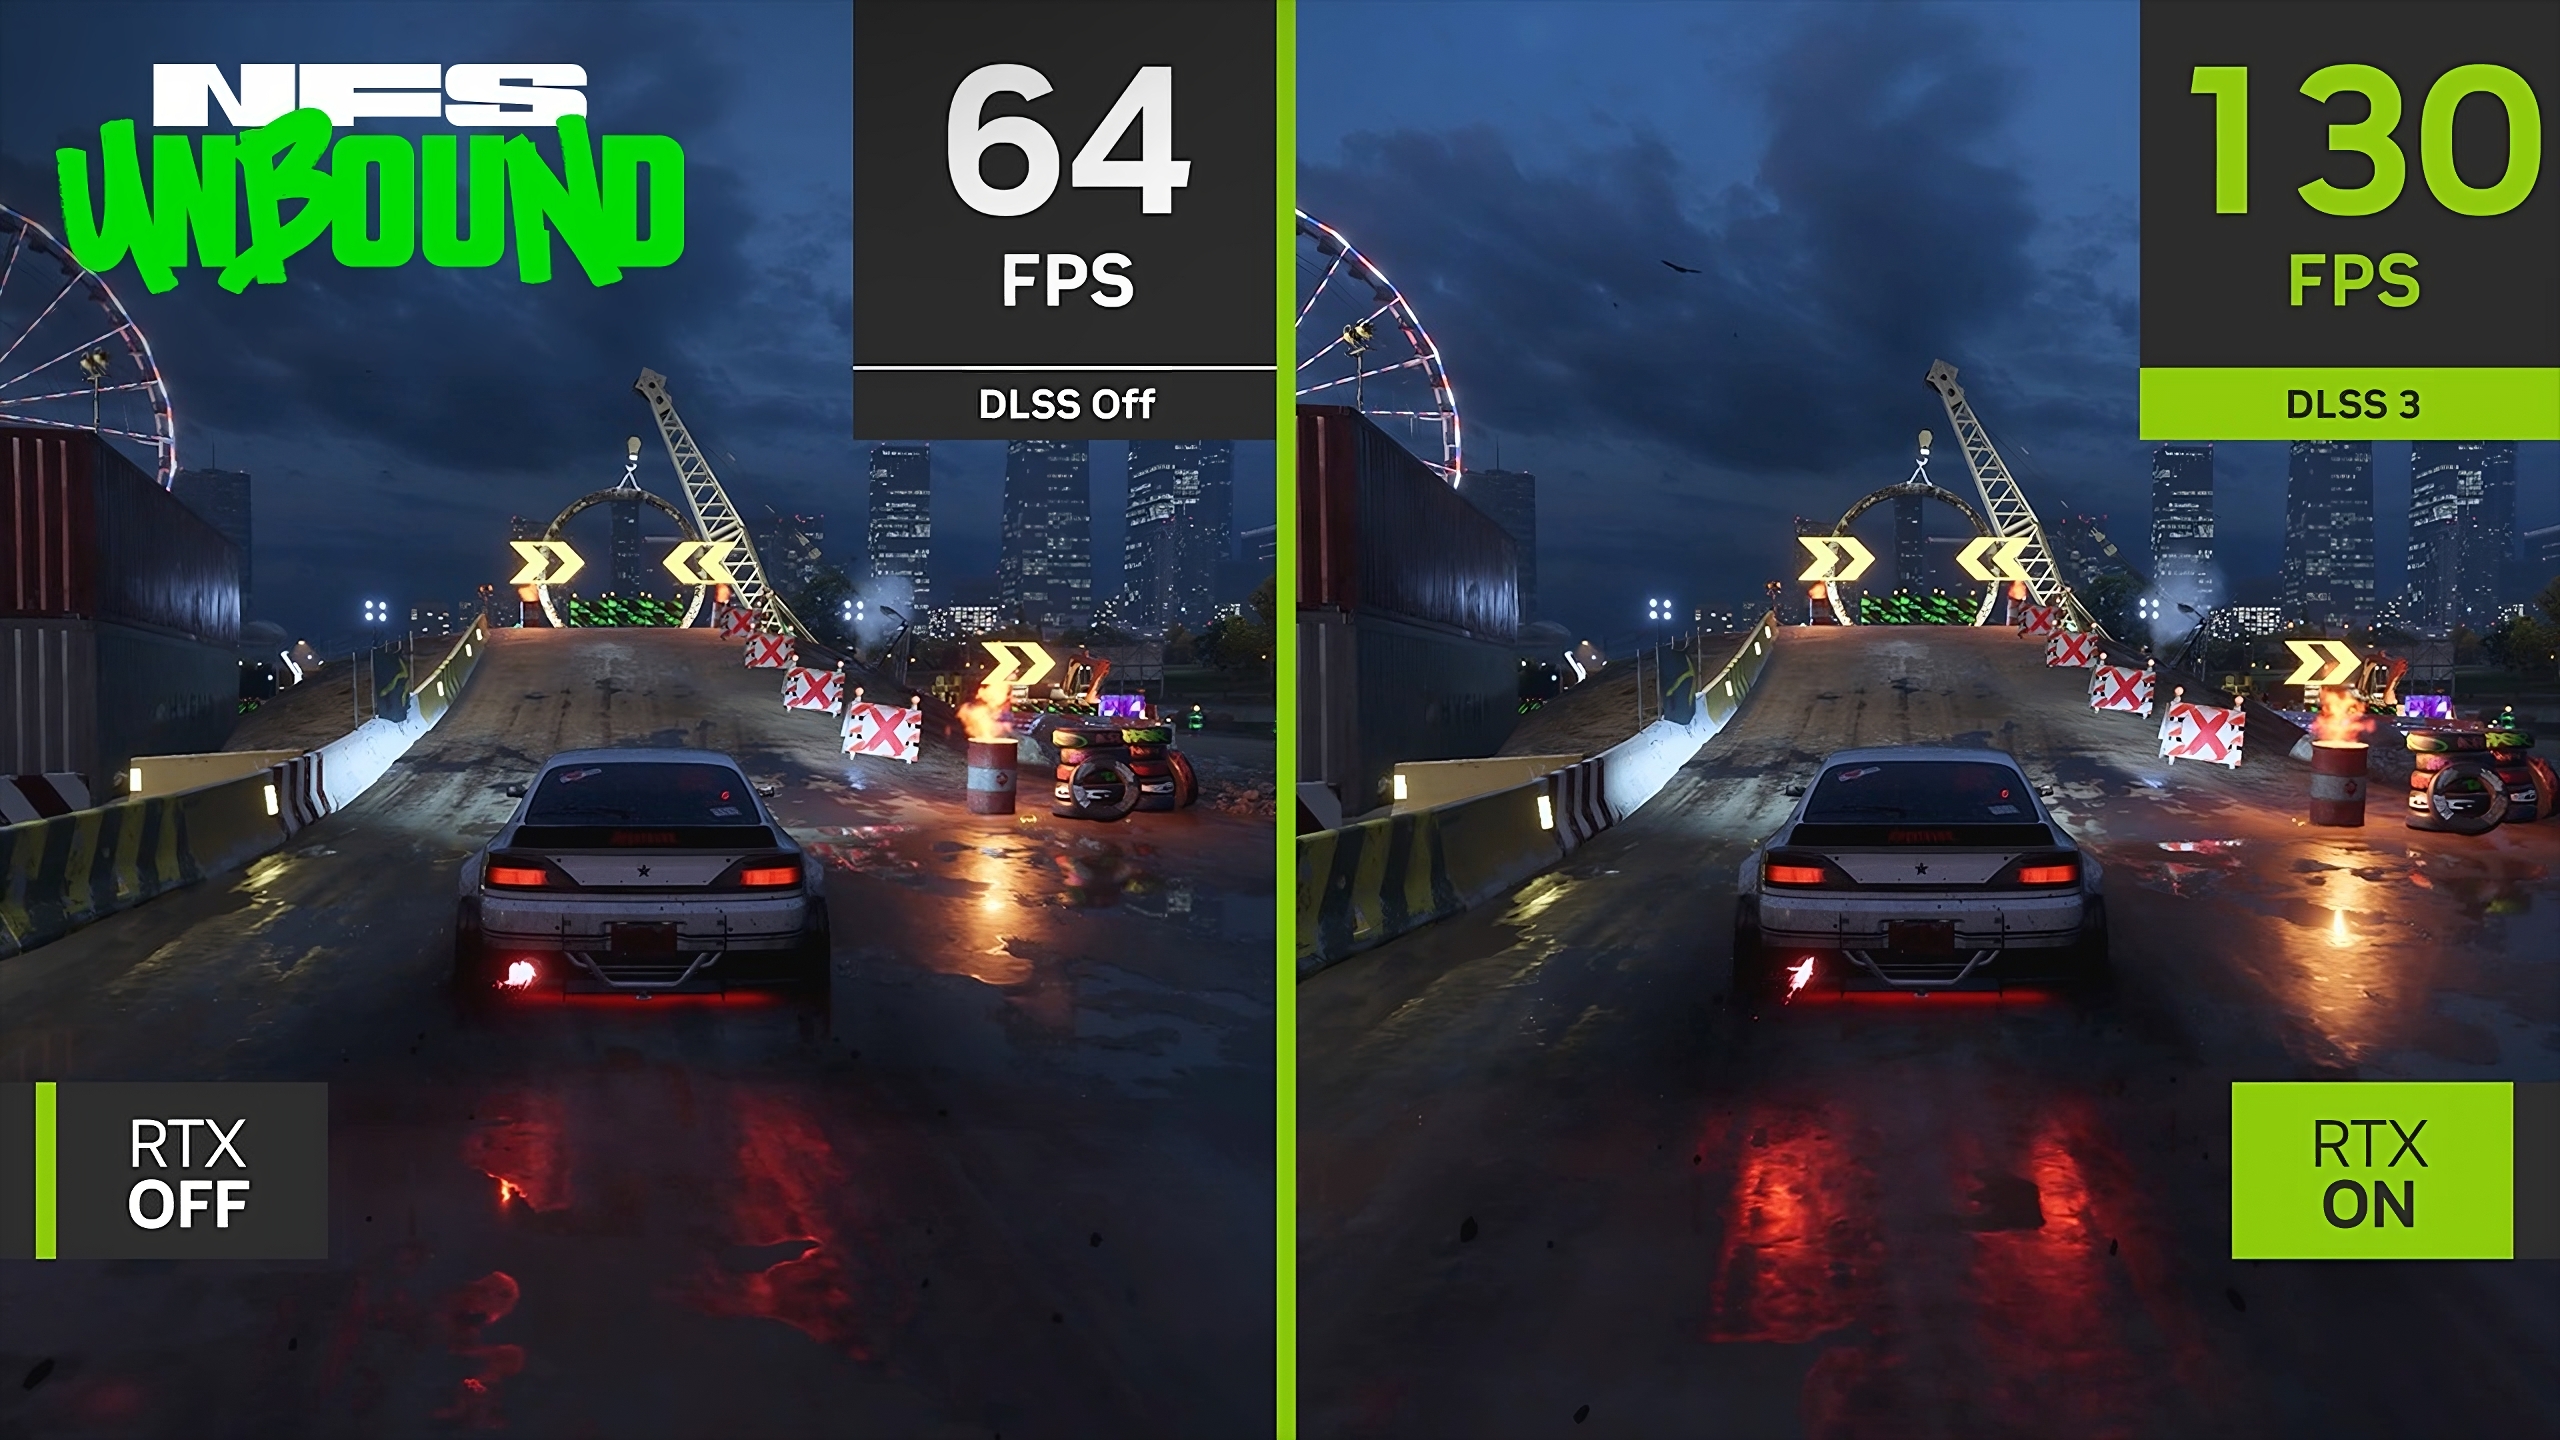 Microsoft plans to streamline game upscaling across different graphics cards